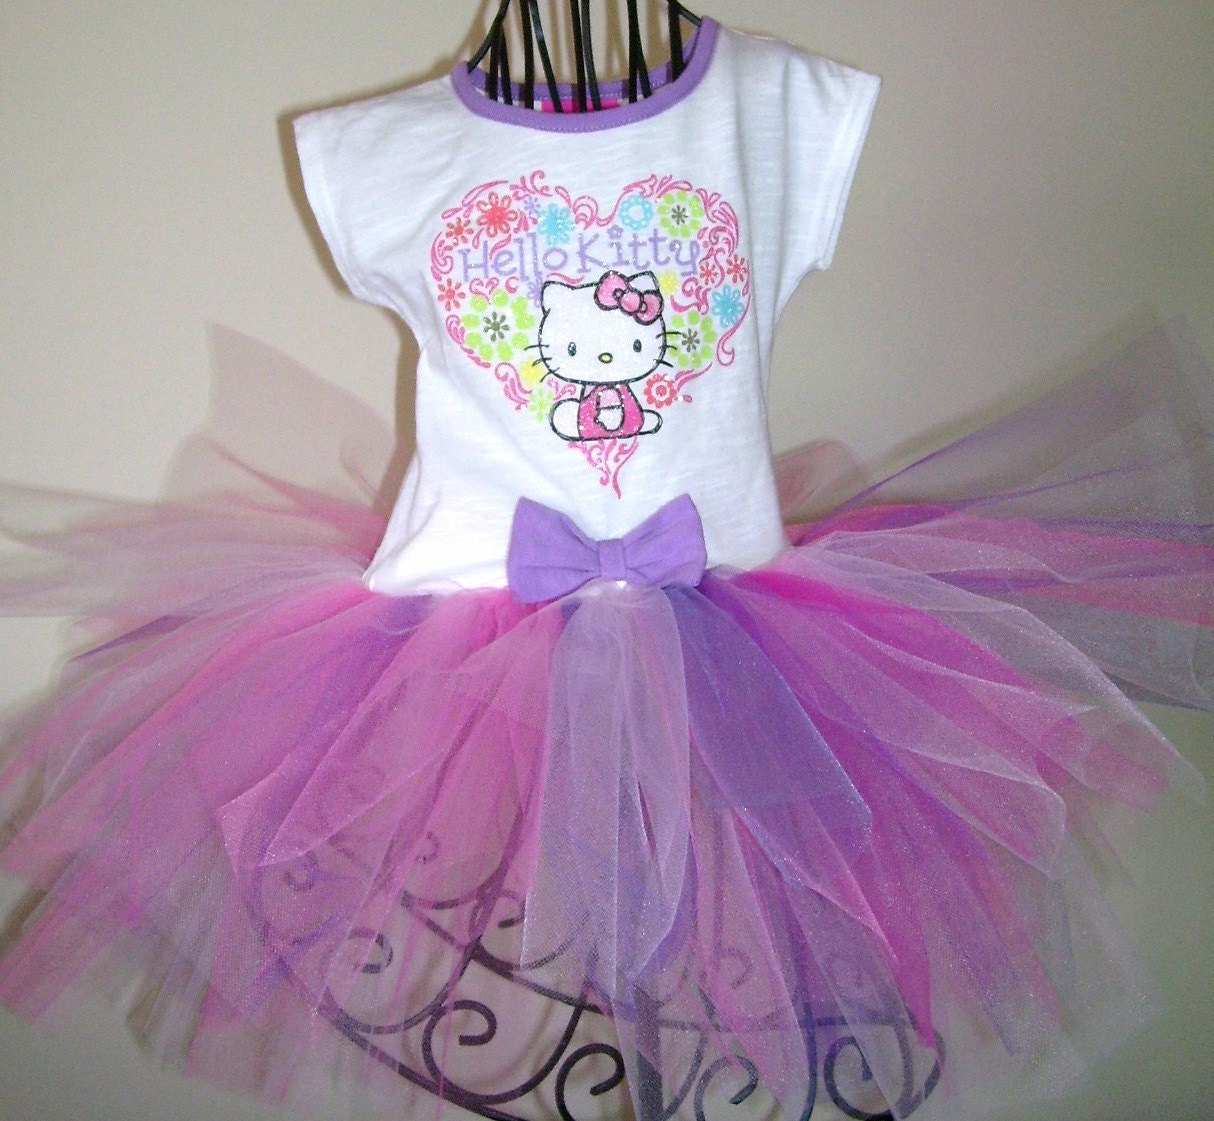 Hello Kitty Tutu Dress size 12 months by DesignsbyClaudia on Etsy